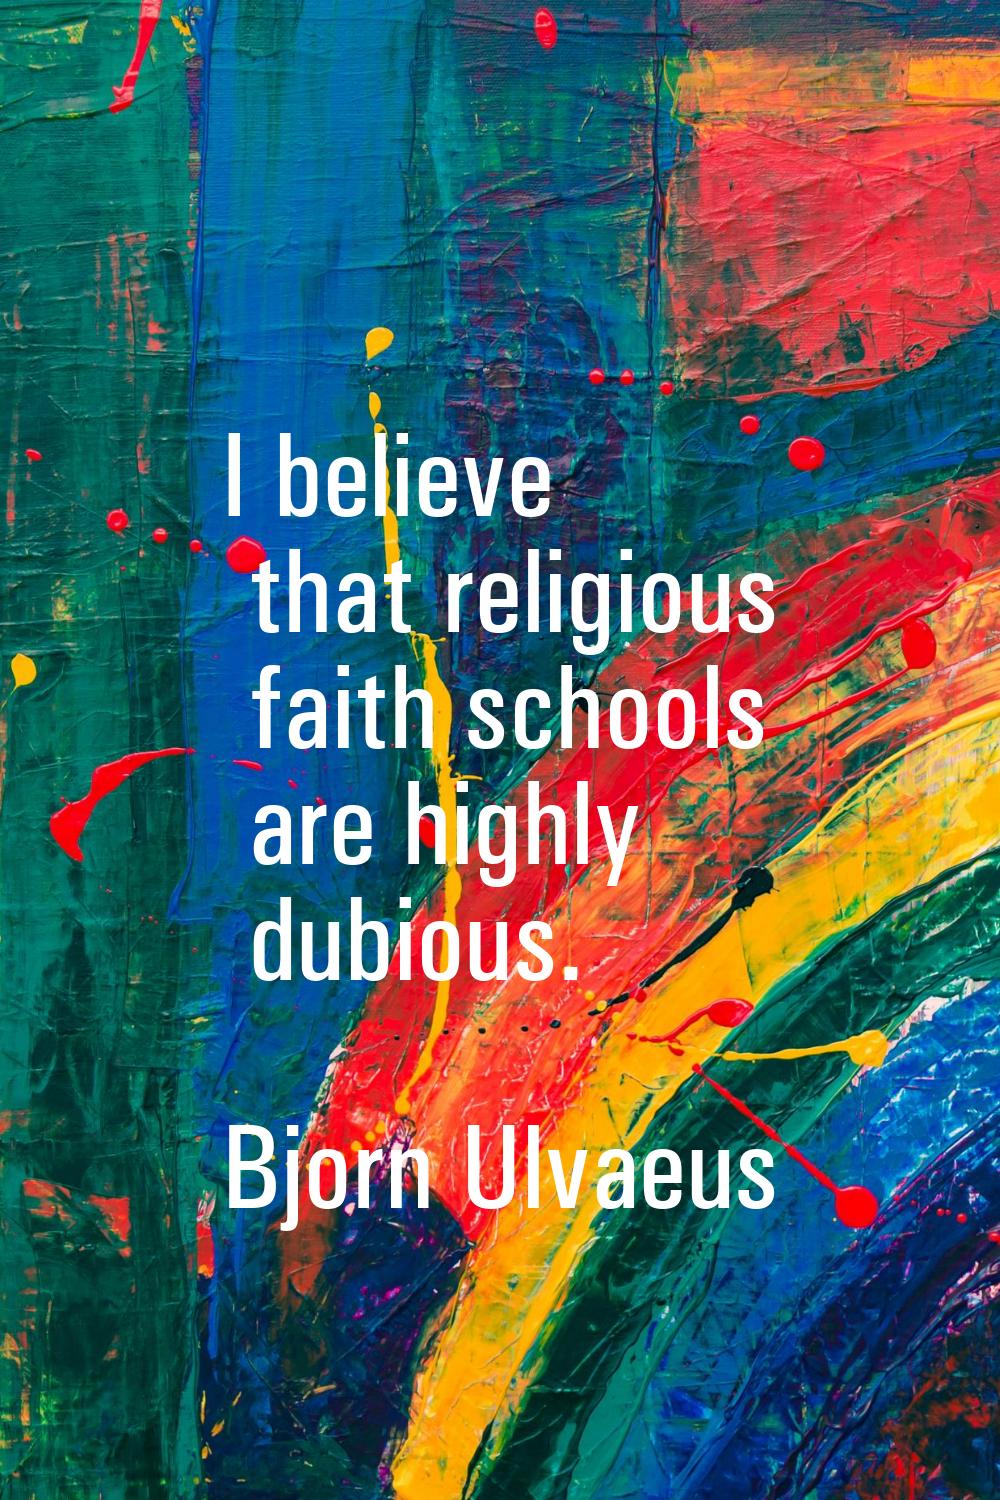 I believe that religious faith schools are highly dubious.